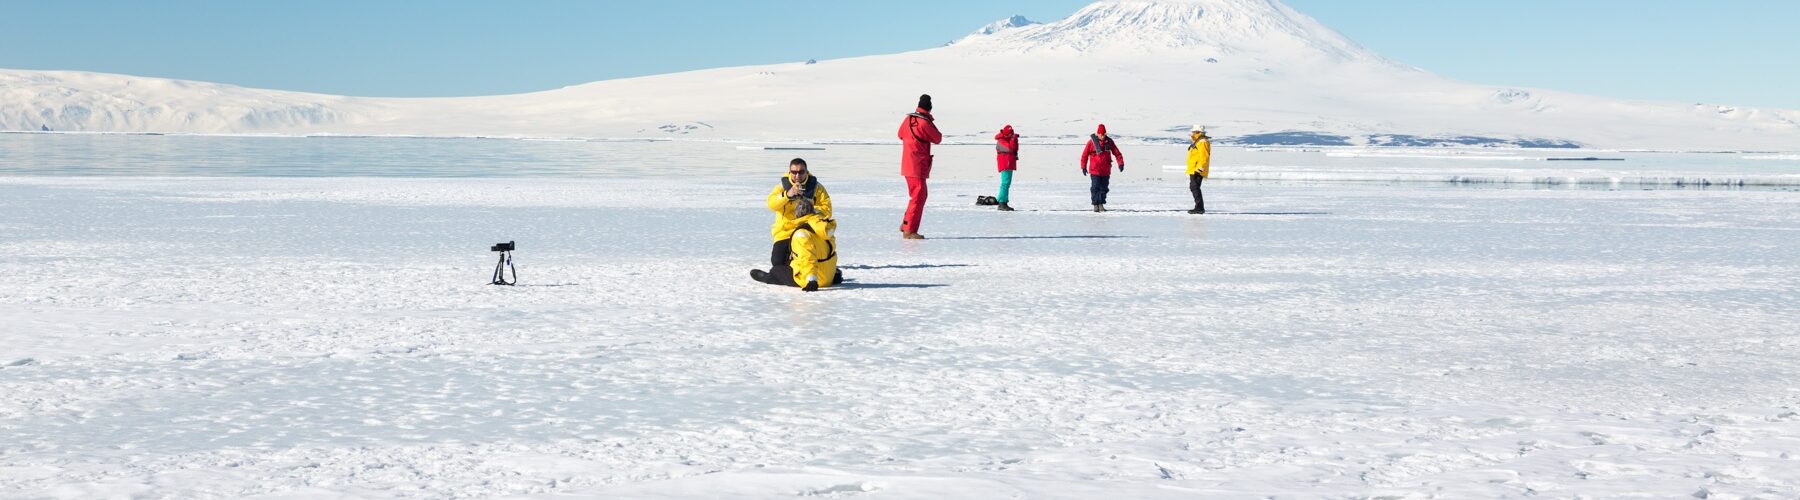 Antarctica - Ross Sea - Oceanwide - Landing with people on McMurdo Sound ice by Rolf Stange